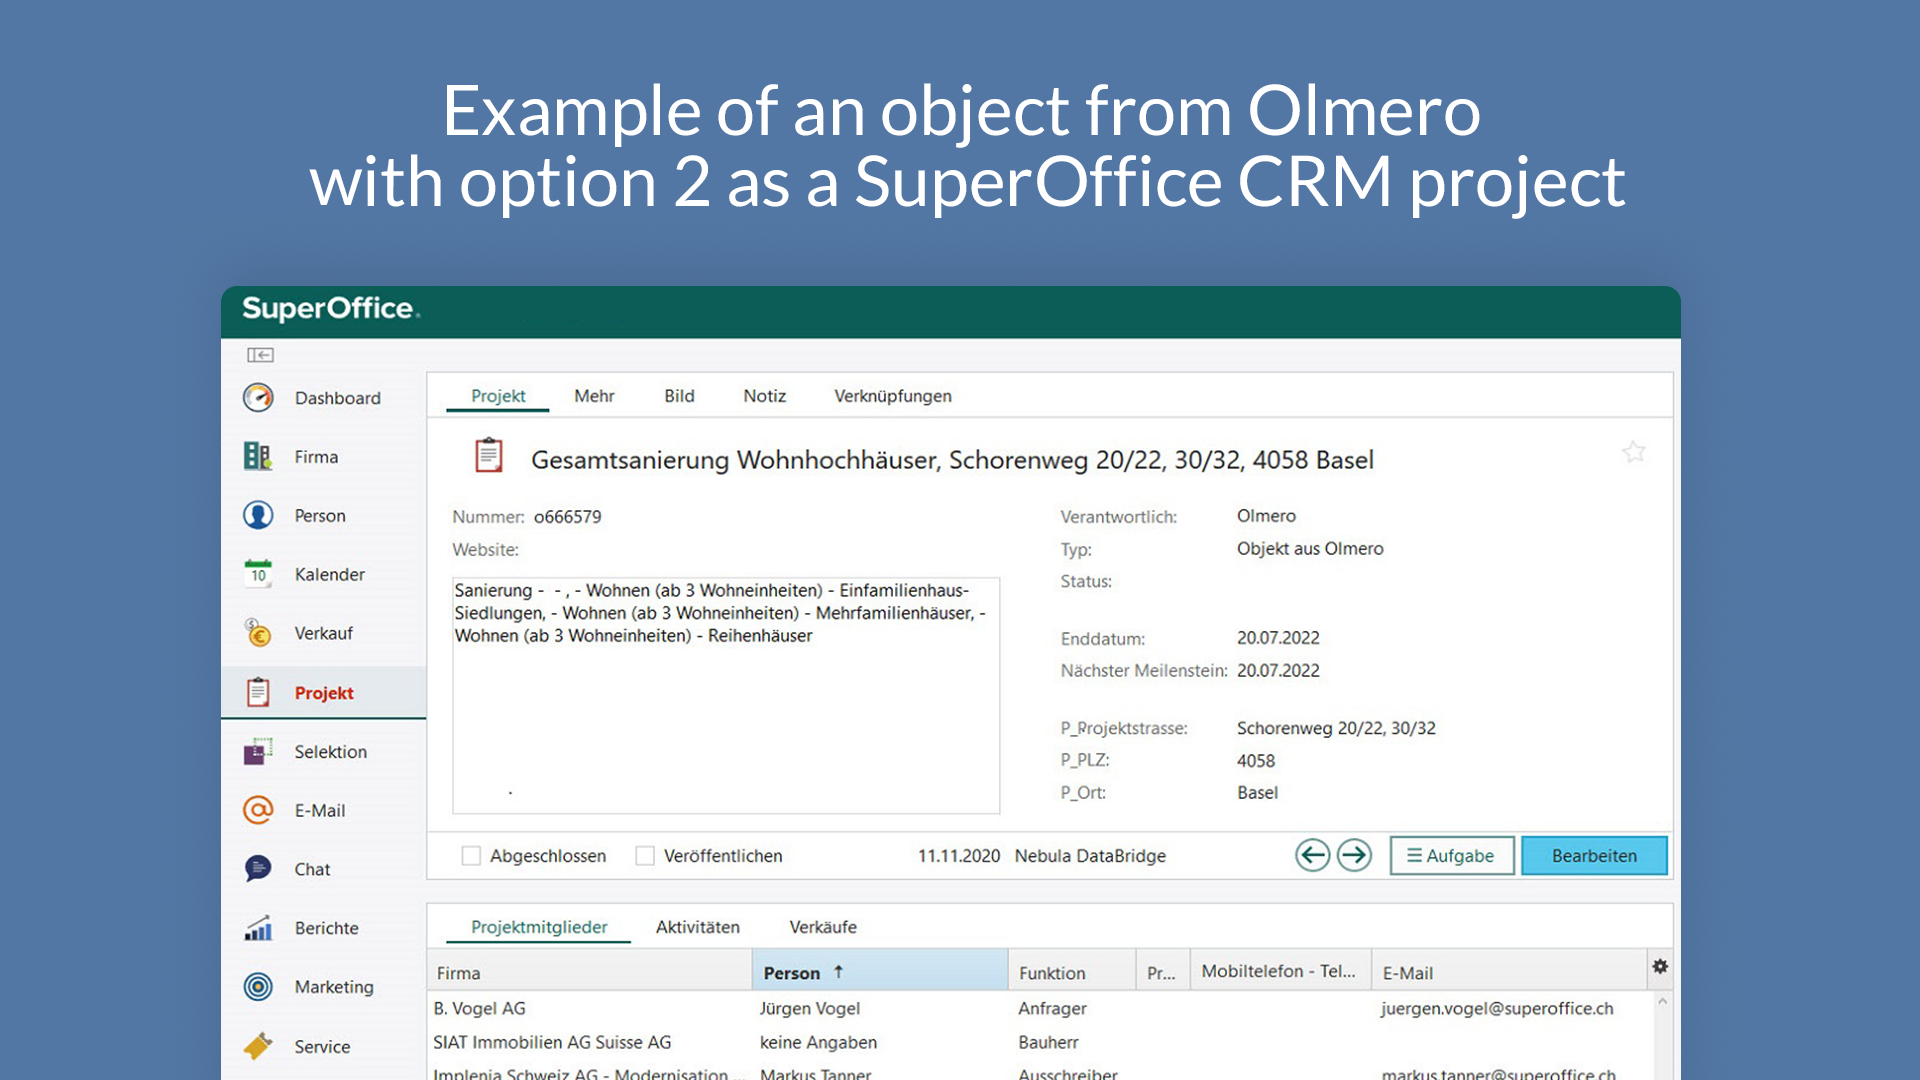 5. Example of an object from Olmero with Option 2 as a SuperOffice CRM project